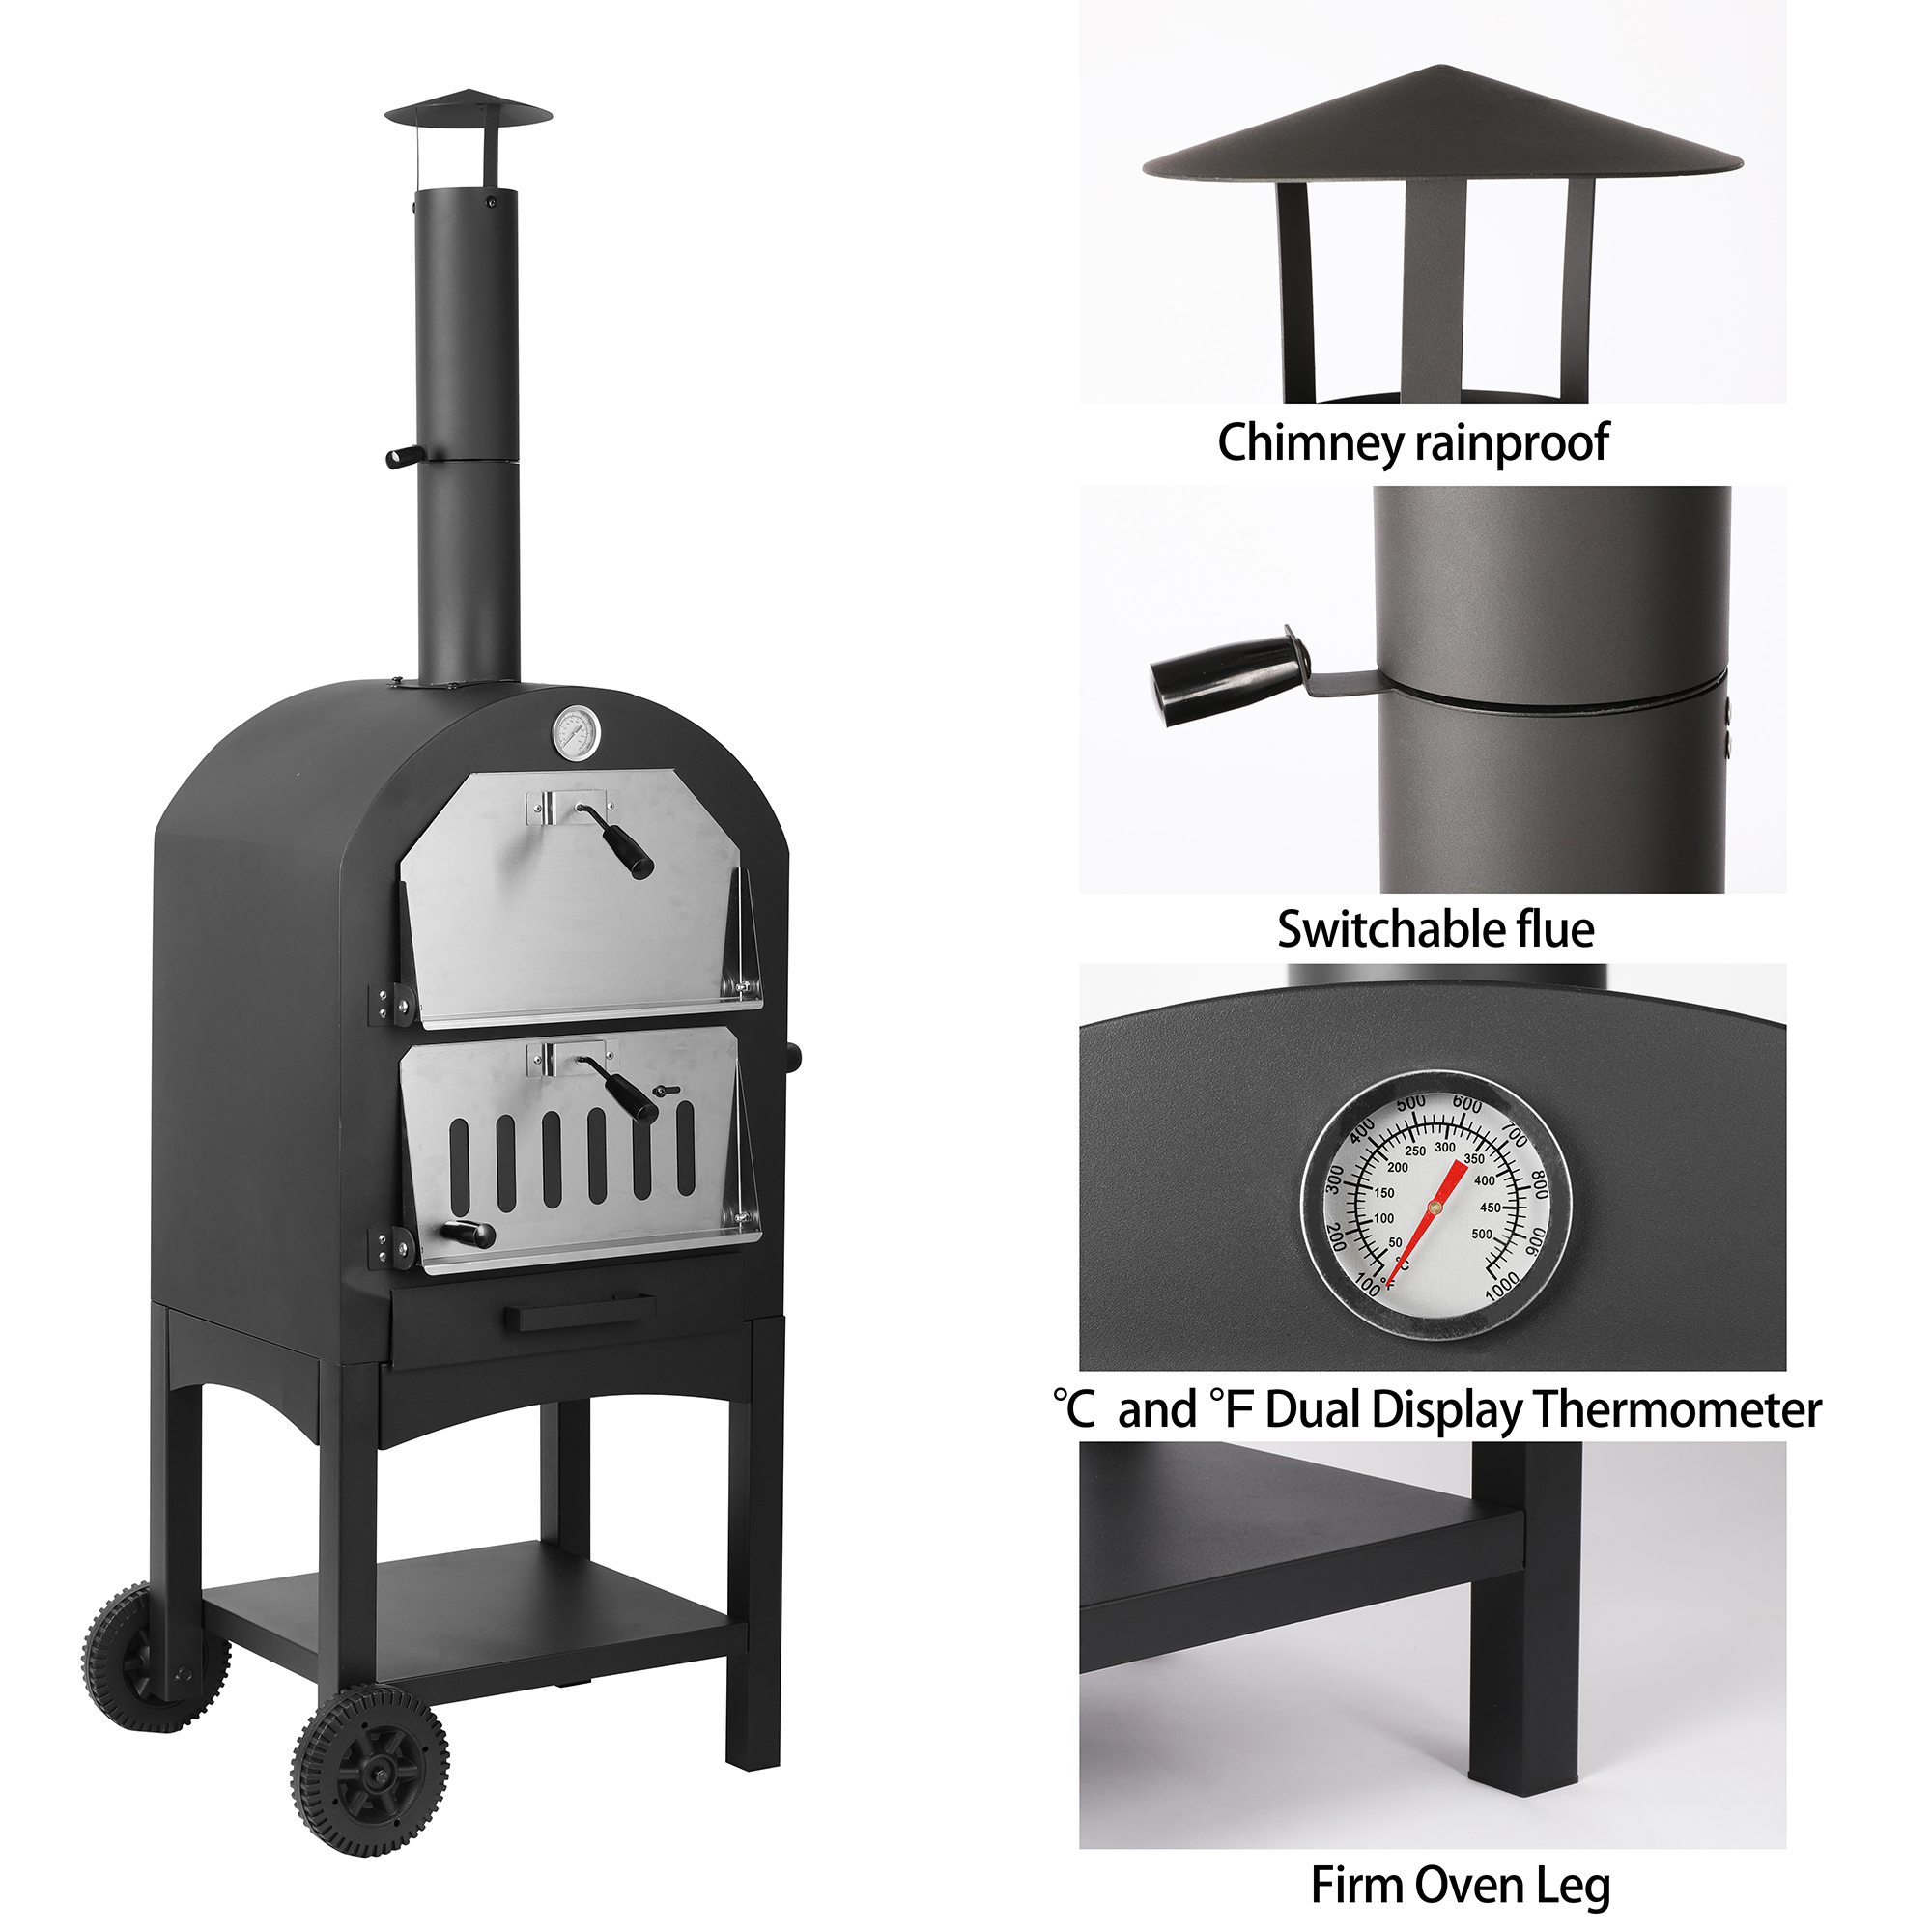 Tolead Outdoor Wood Burning Pizza Oven with Waterproof Cover, Black - image 2 of 11